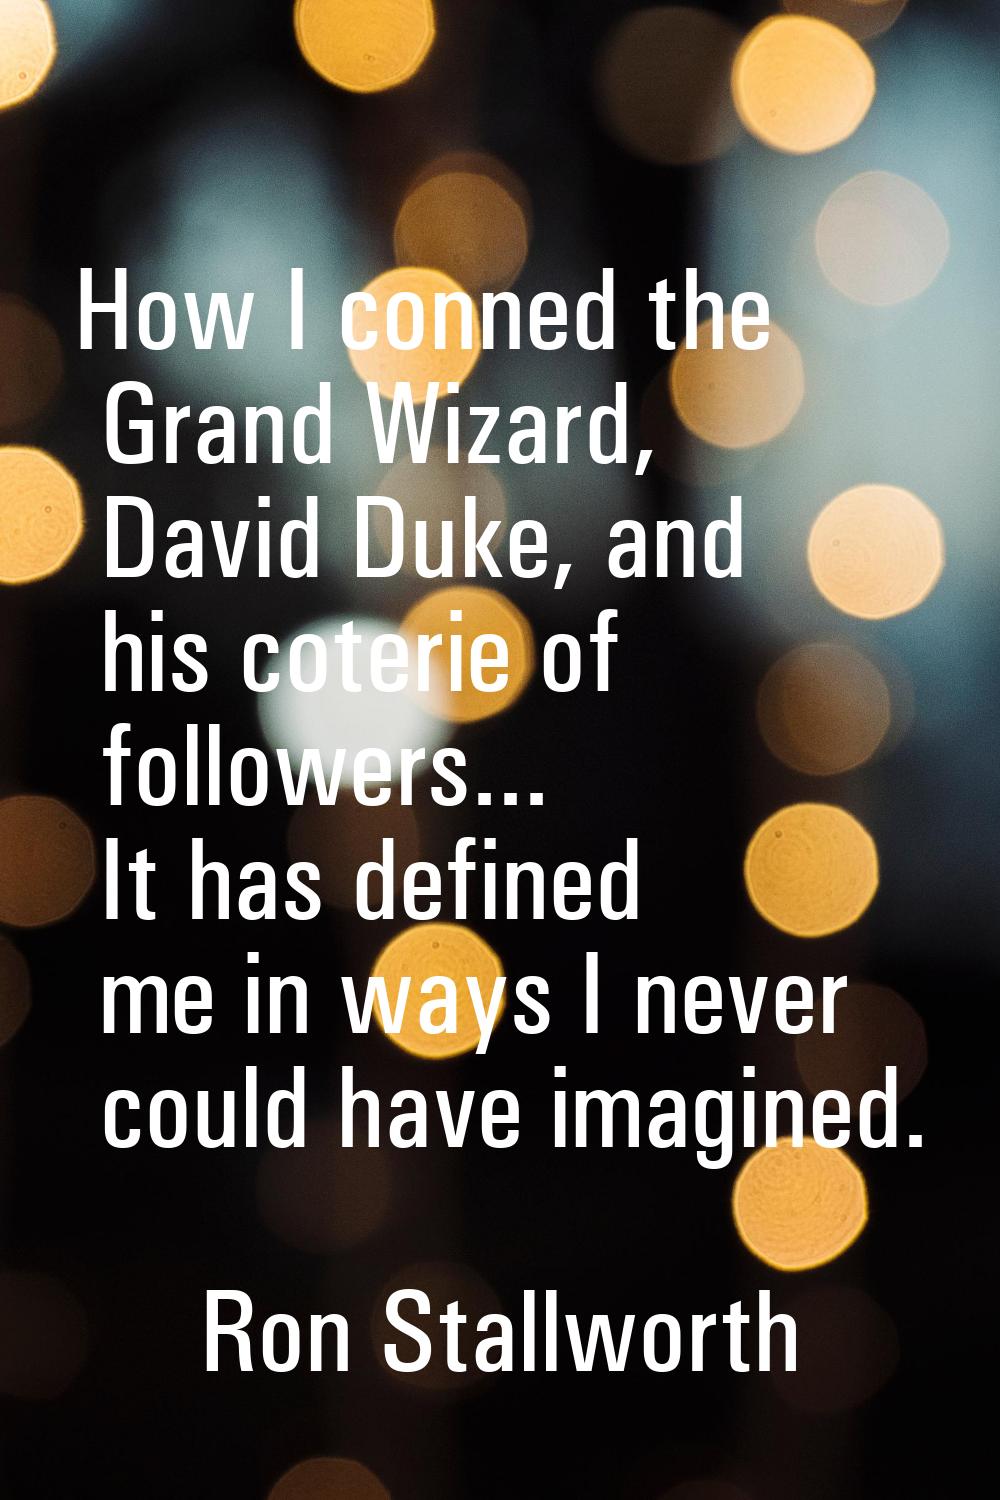 How I conned the Grand Wizard, David Duke, and his coterie of followers... It has defined me in way